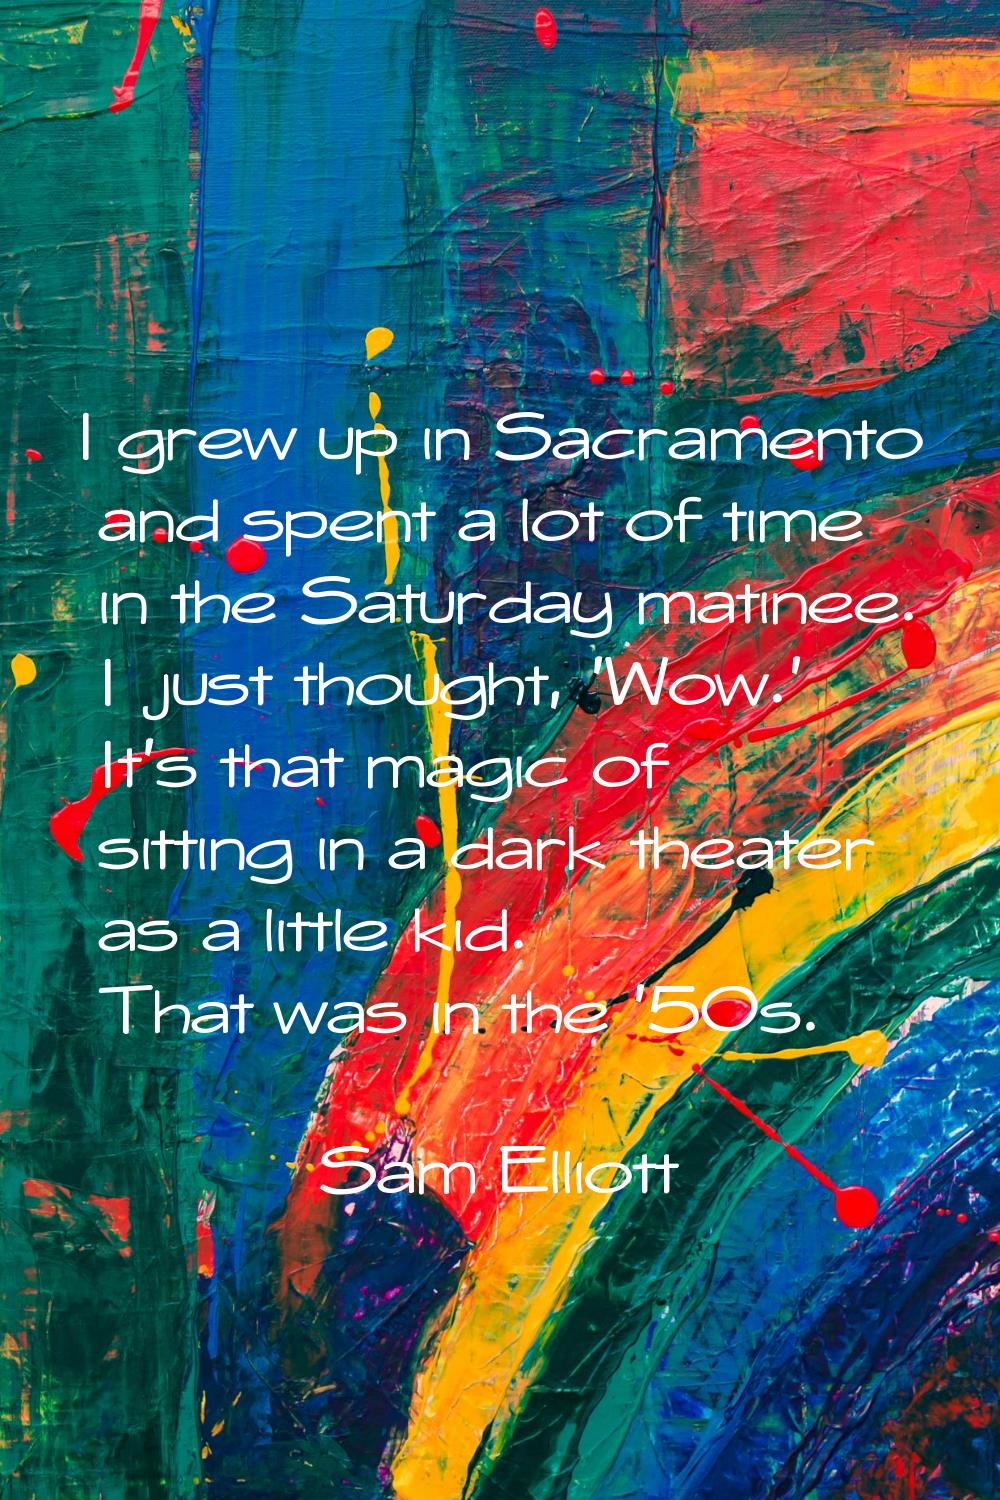 I grew up in Sacramento and spent a lot of time in the Saturday matinee. I just thought, 'Wow.' It'